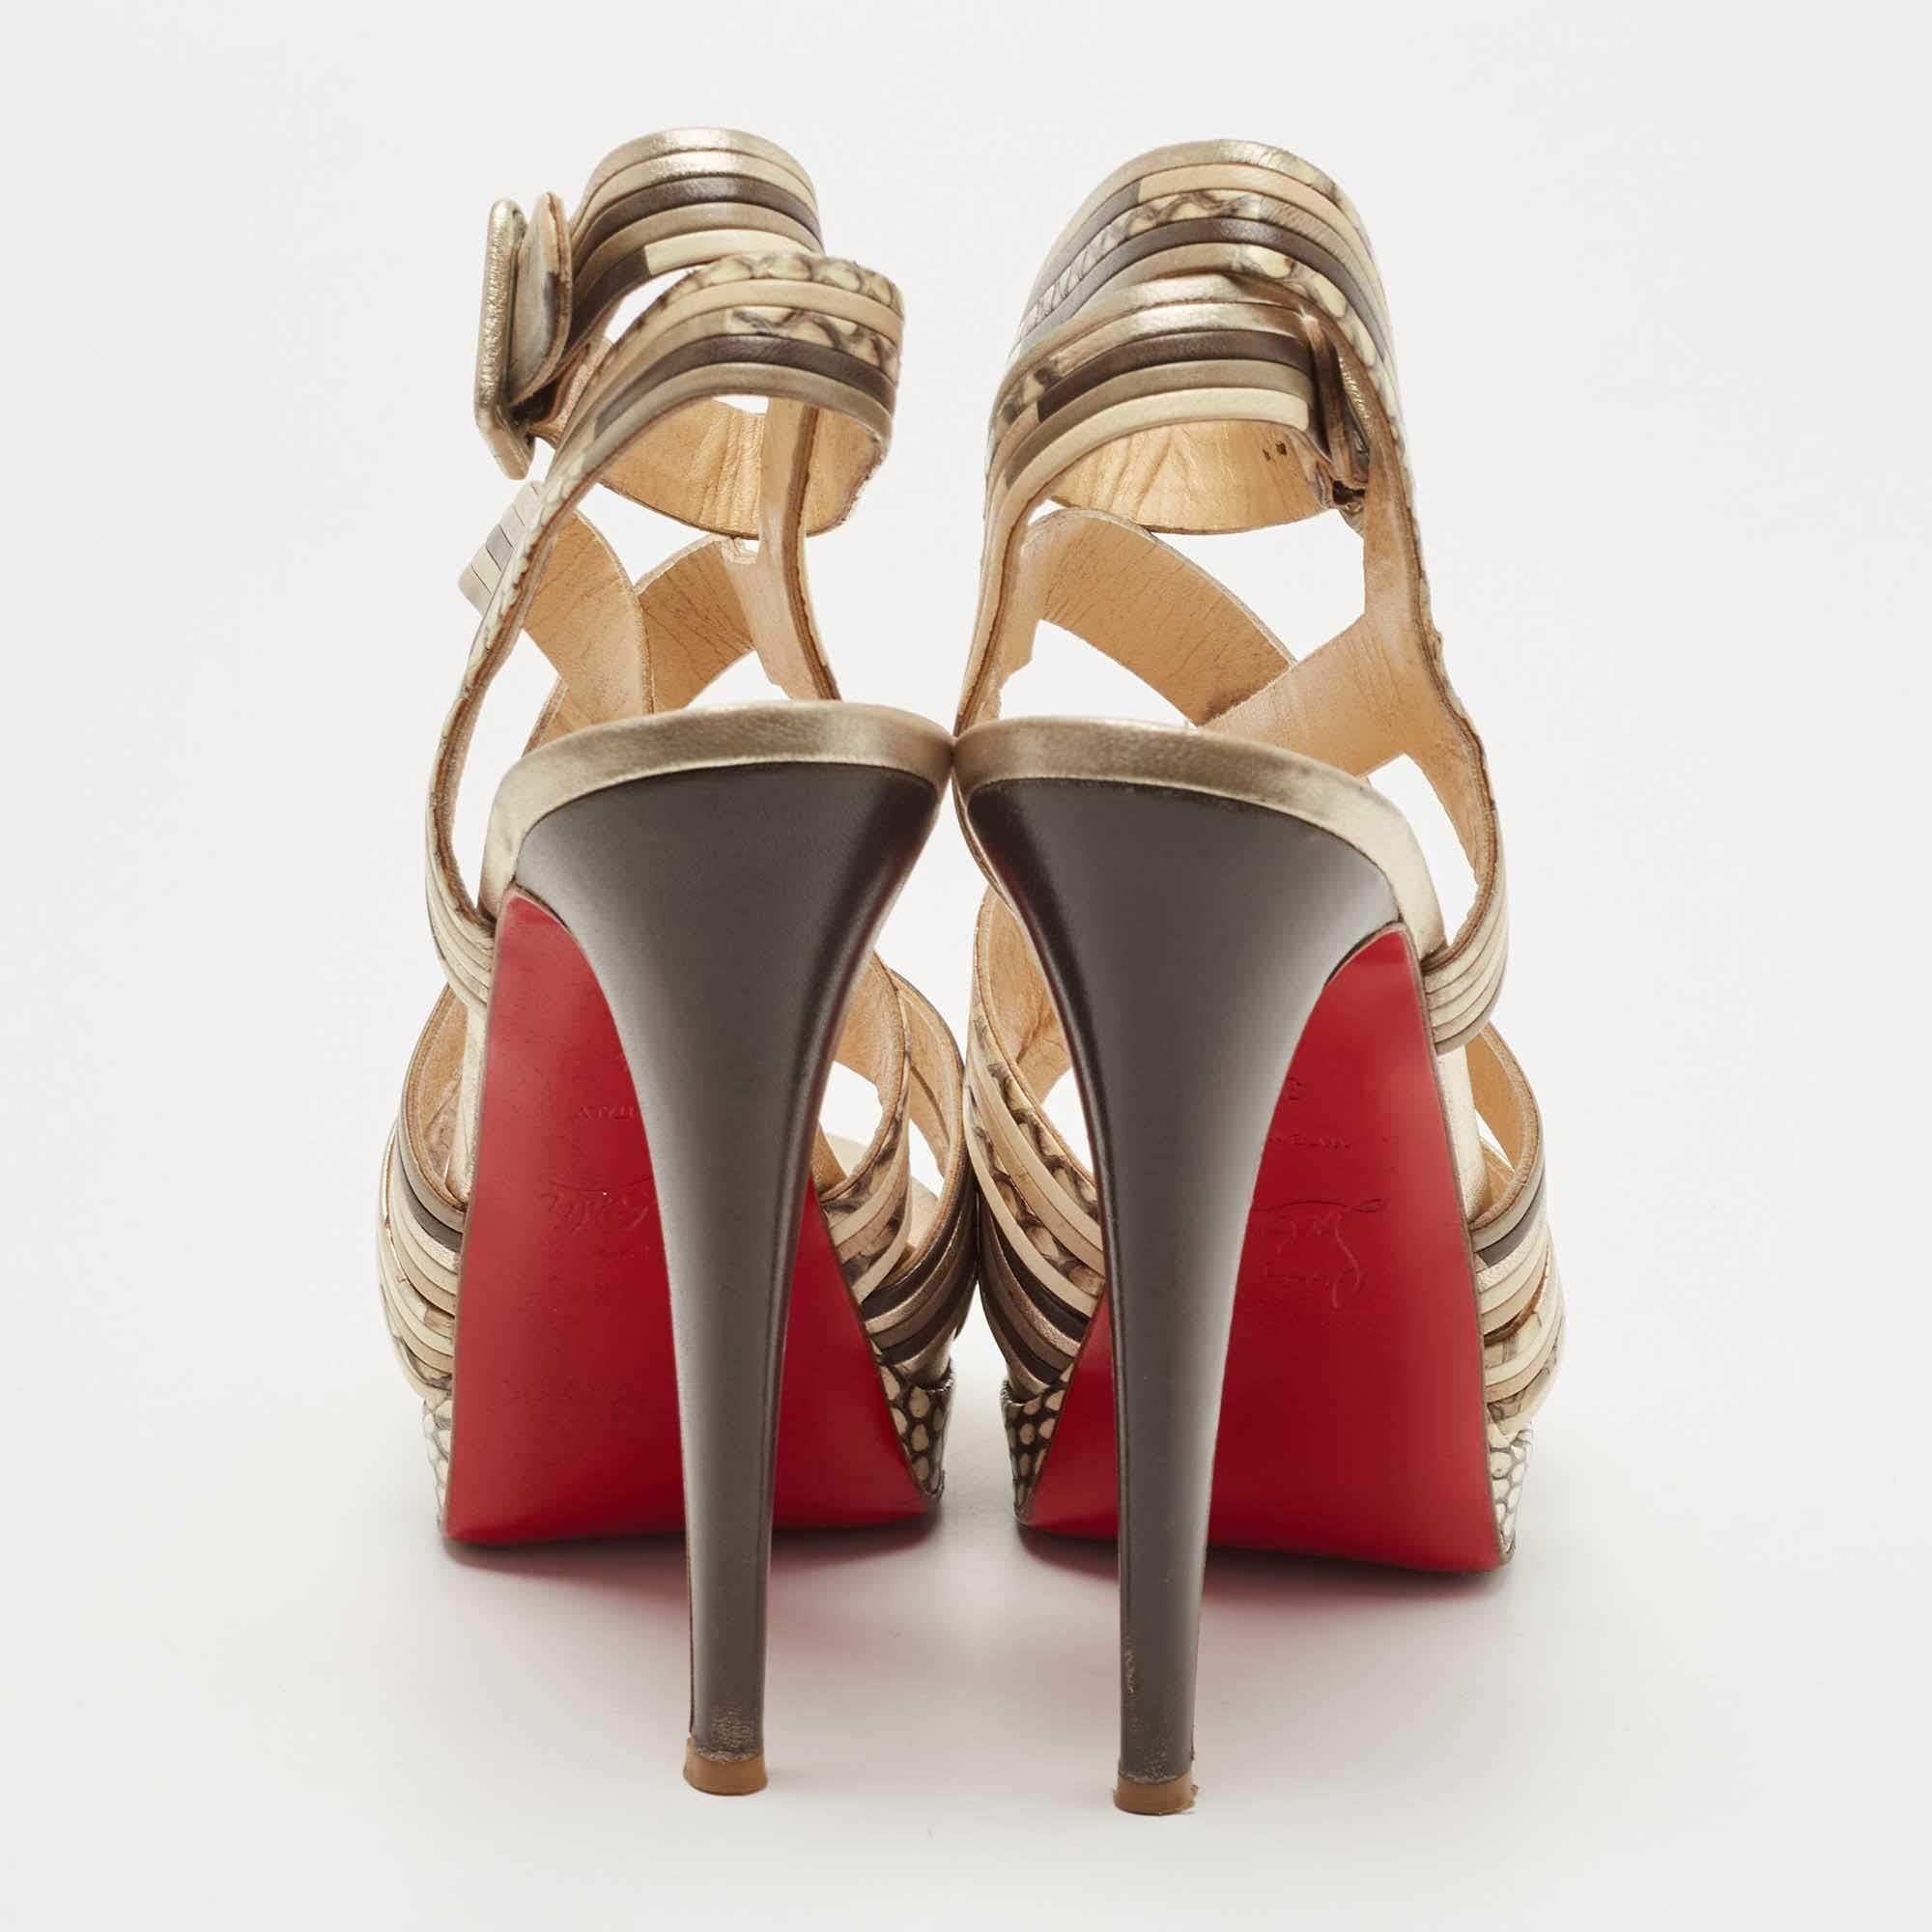 Christian Louboutin Brown/Beige Leather Strappy Platform Sandals Size 38.5 2